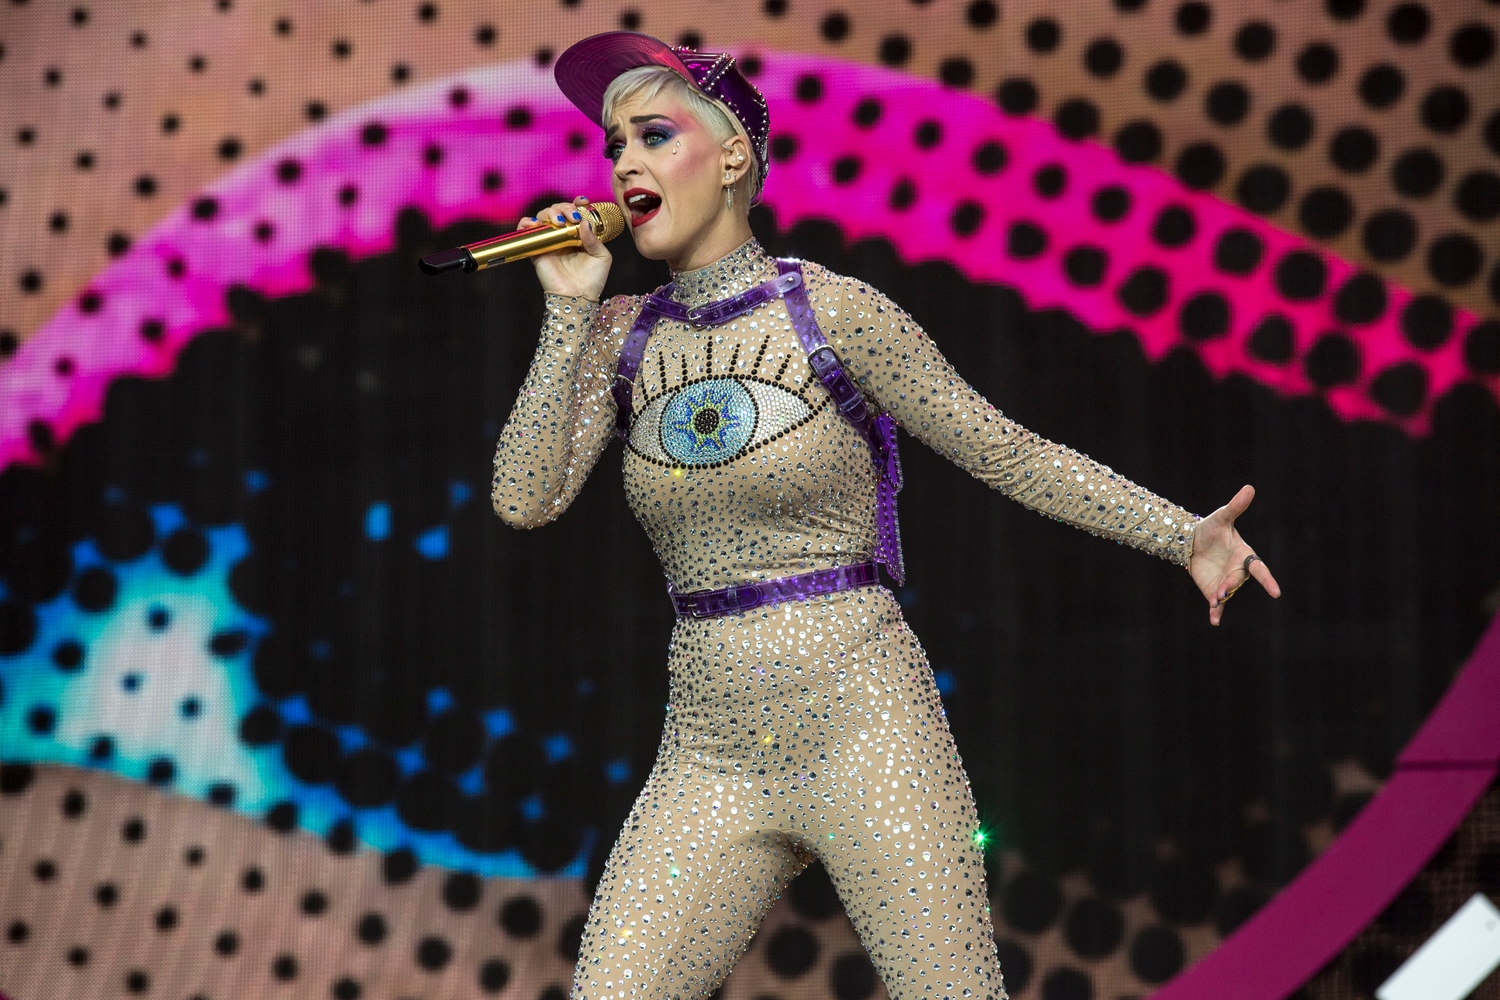 Katy Perry brings ridiculousness (and lots of it) to Glastonbury 2017